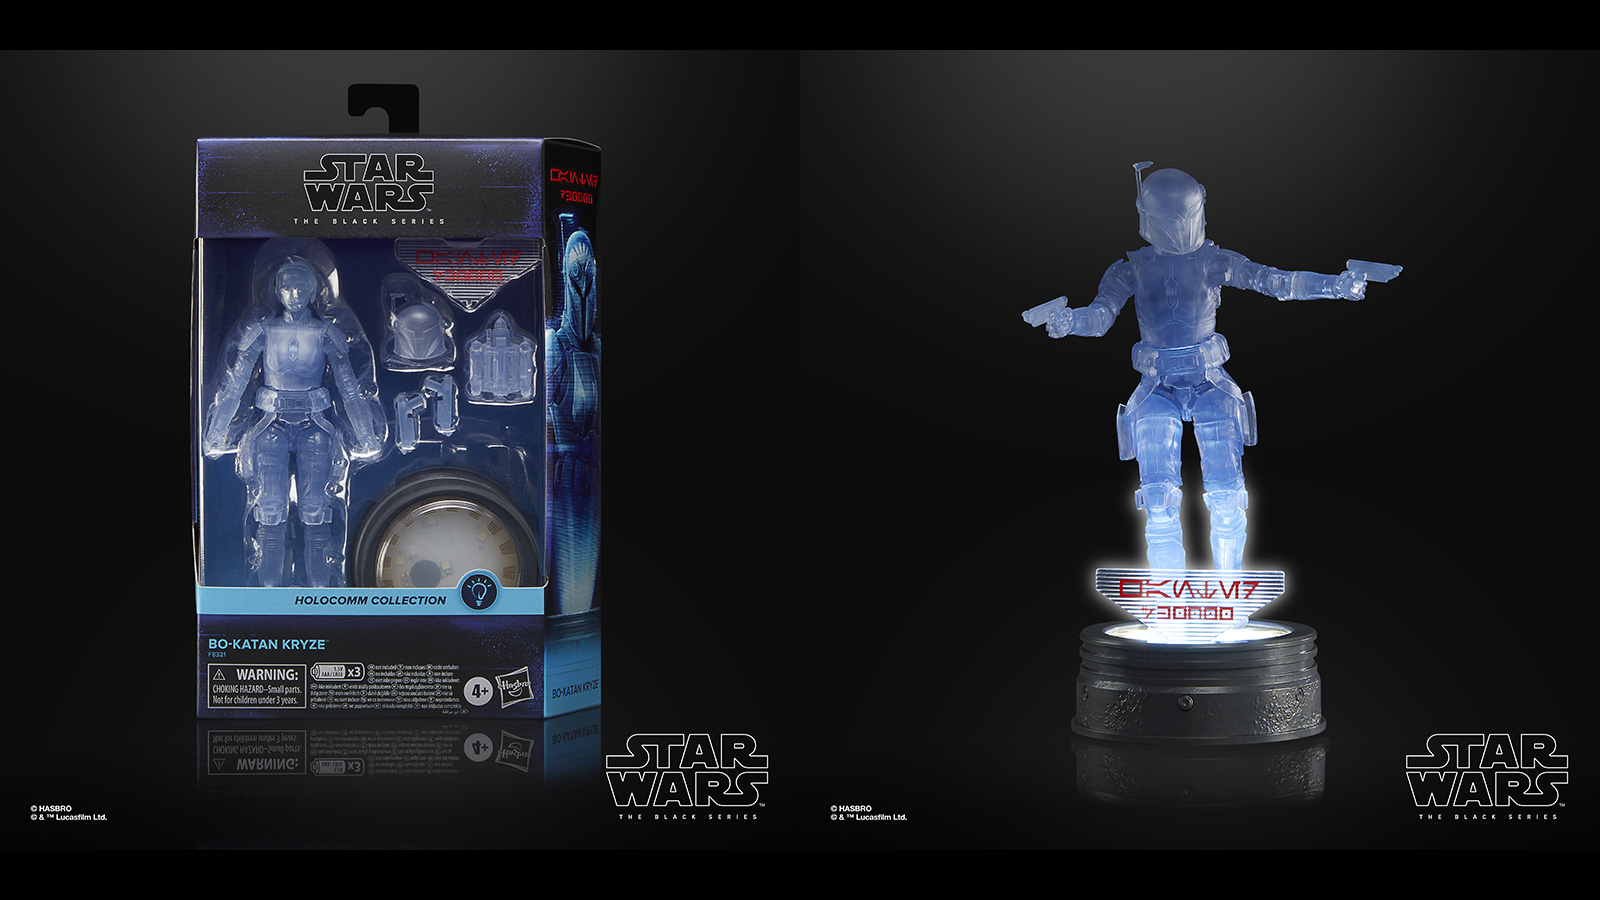 Preorder Now At Target - Exclusive TBS 6-Inch Holocomm Collection Bo-Katan Kryze